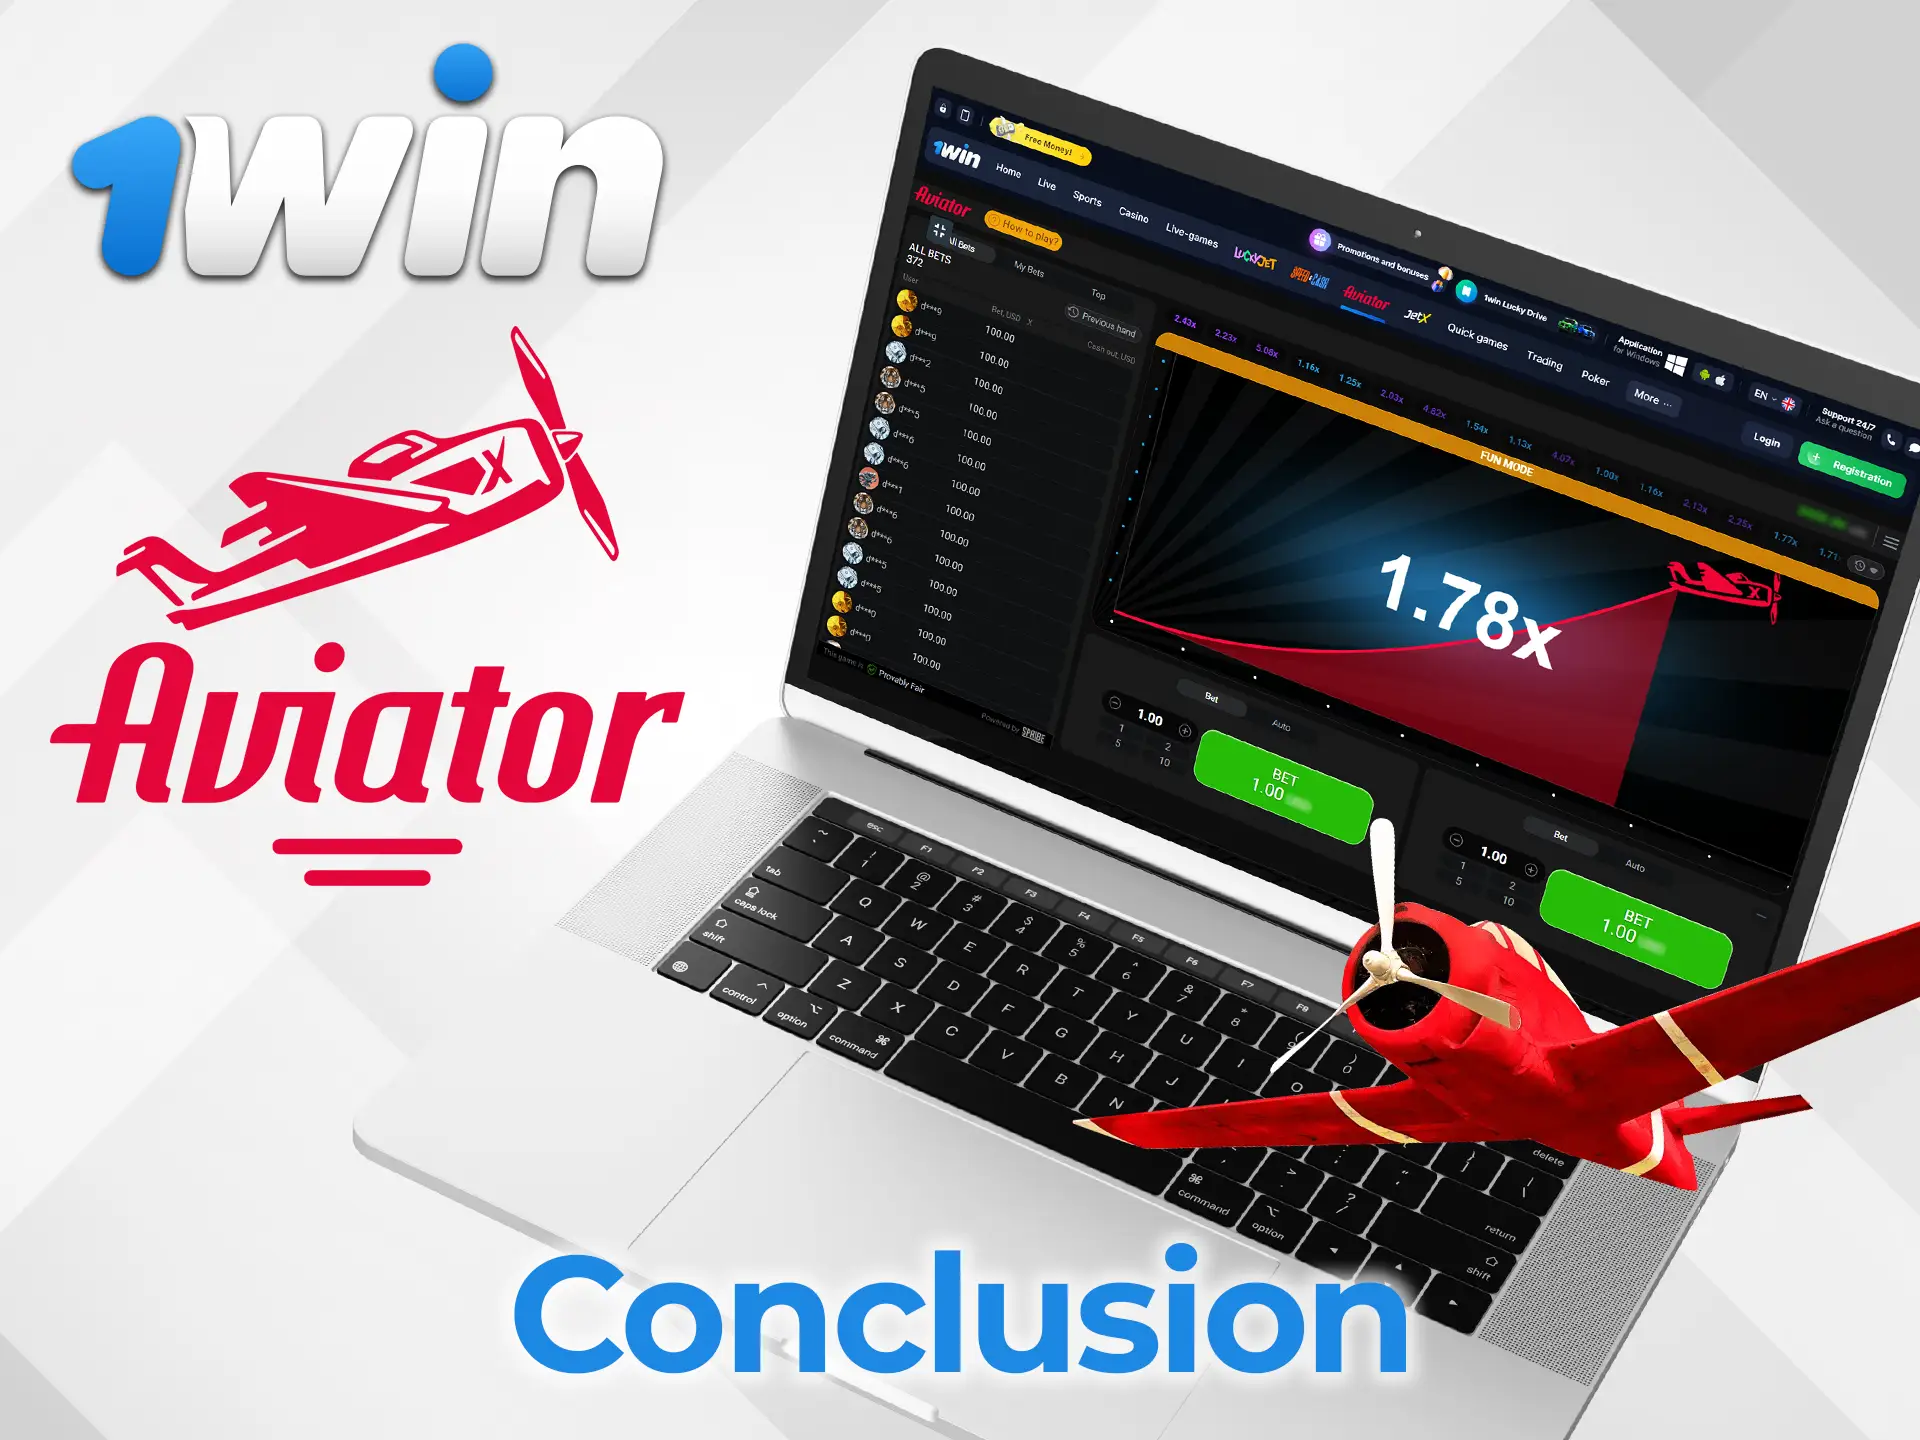 Aviator 1Win is one of the most popular and unconventional gambling game.